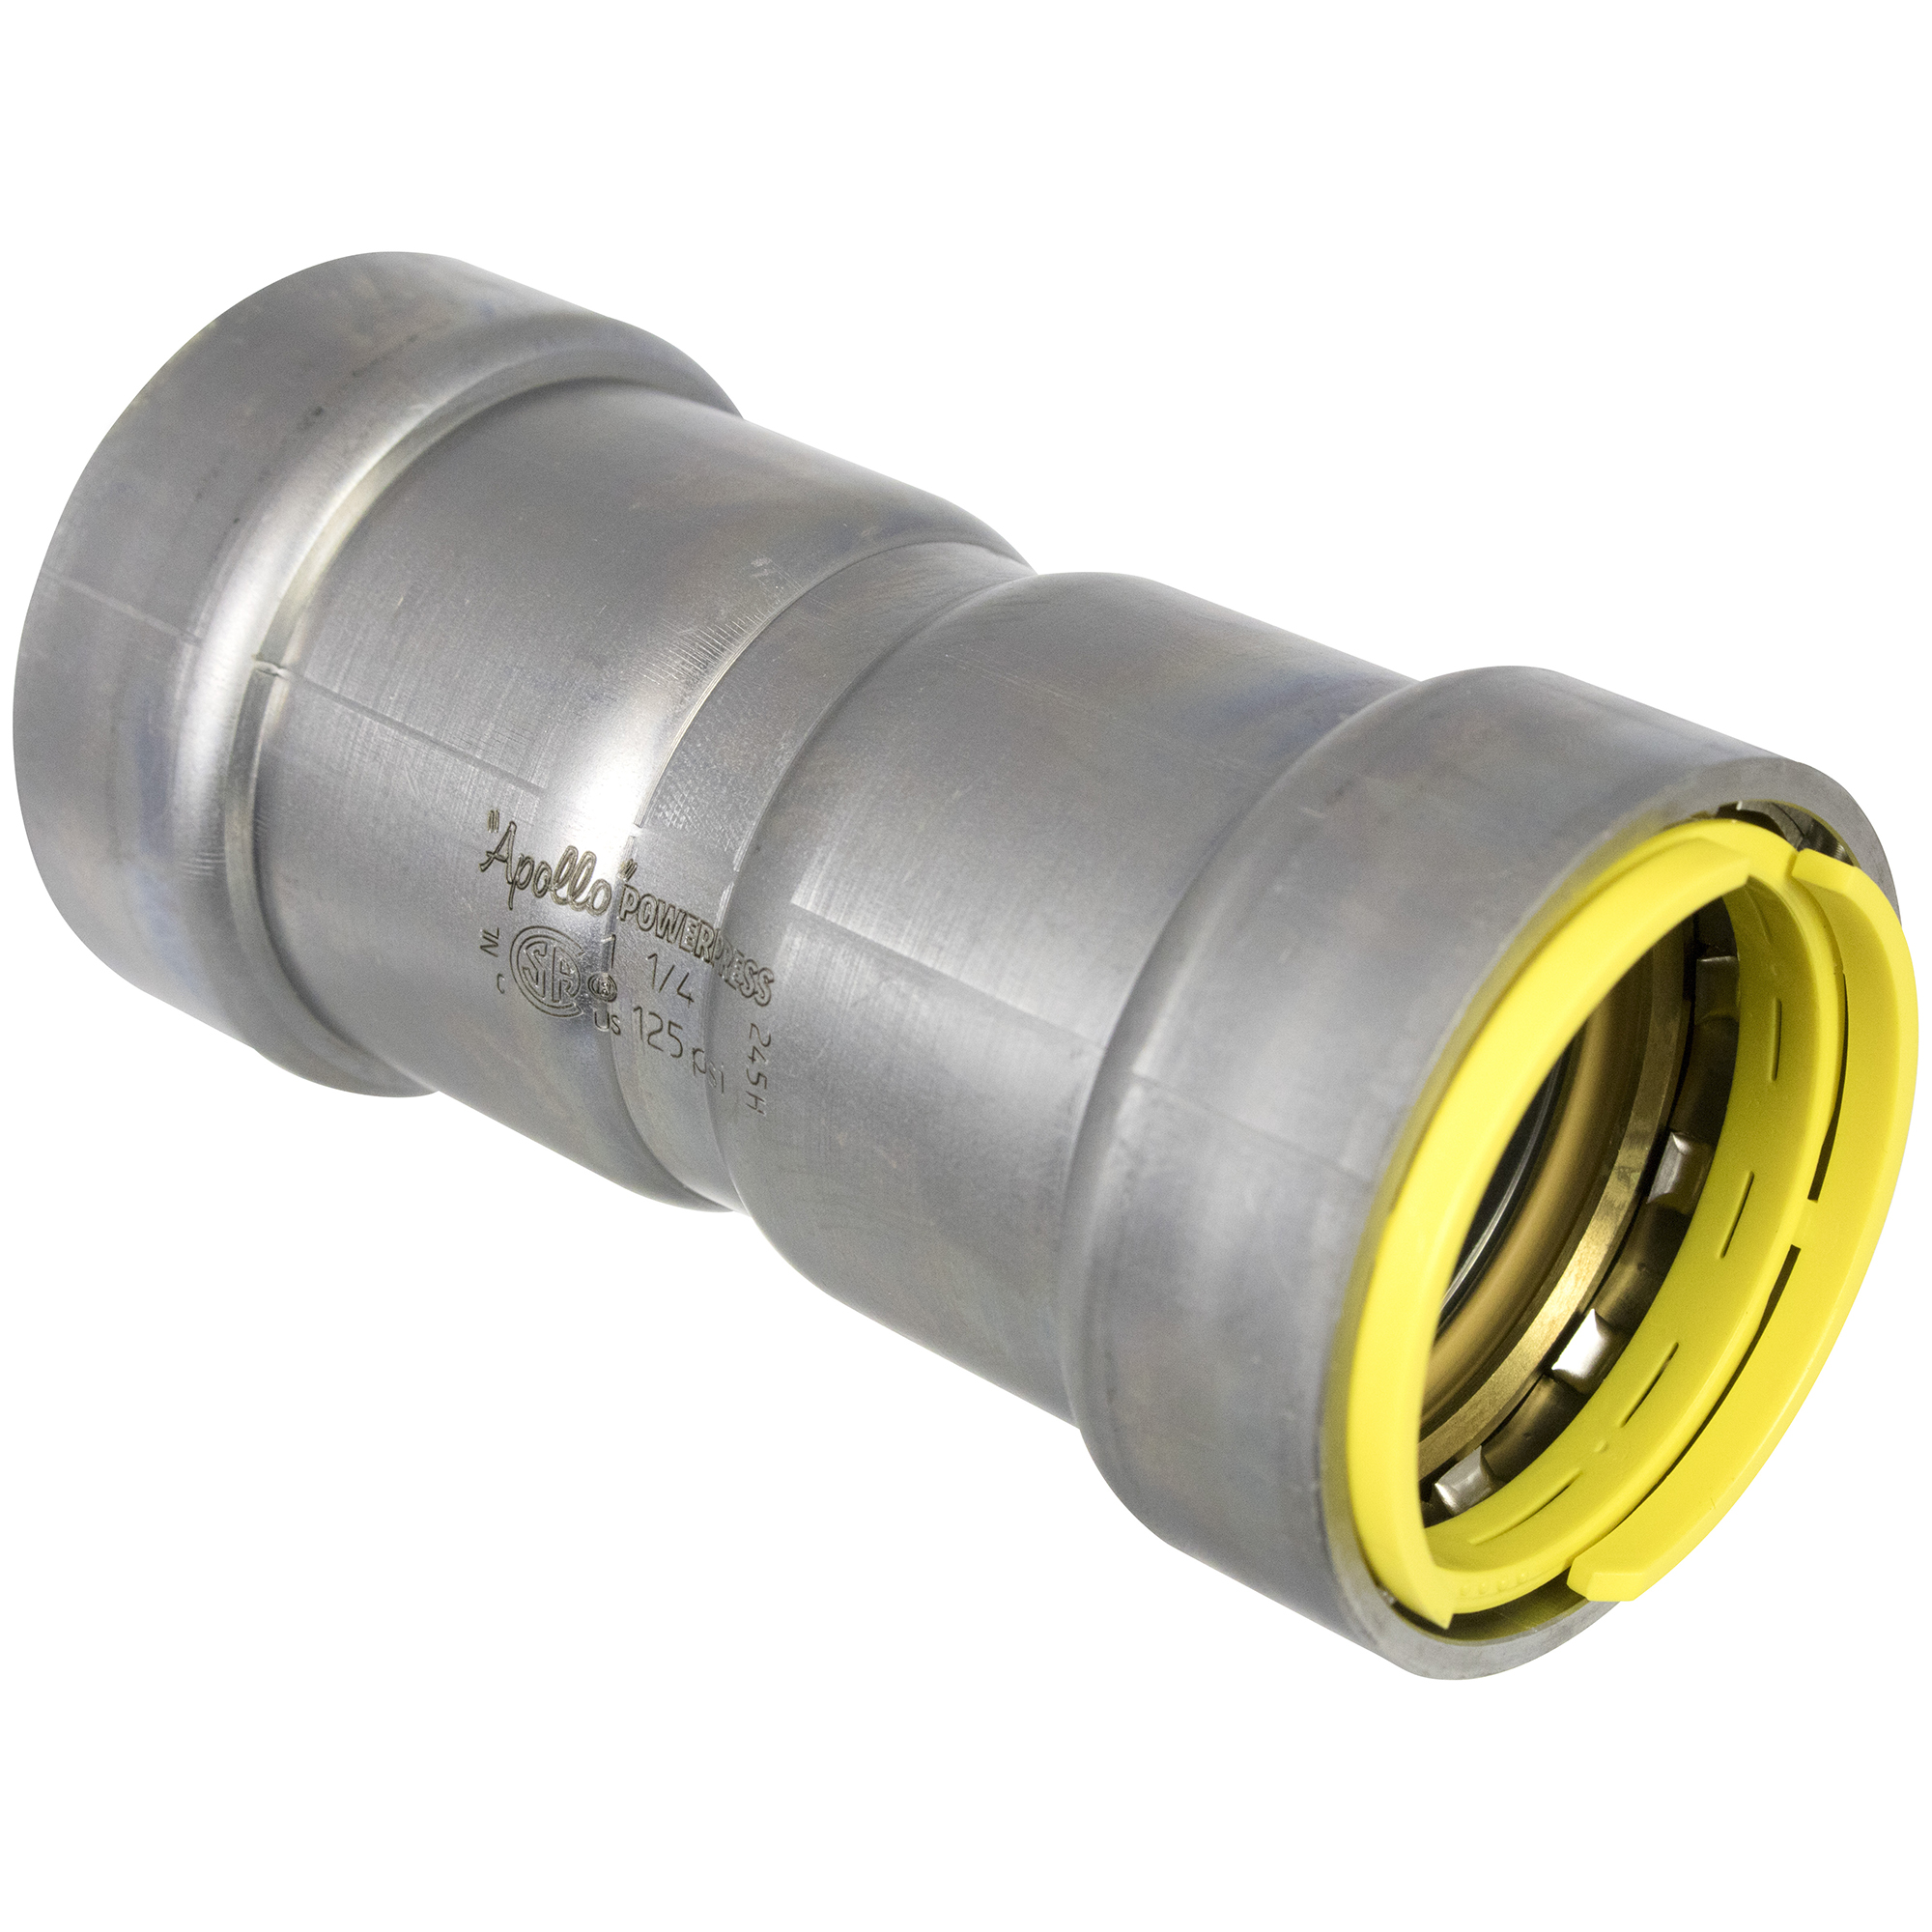 Apollo® PowerPress PWR7481320 400G Coupling With Stop, 1-1/4 in, Gas